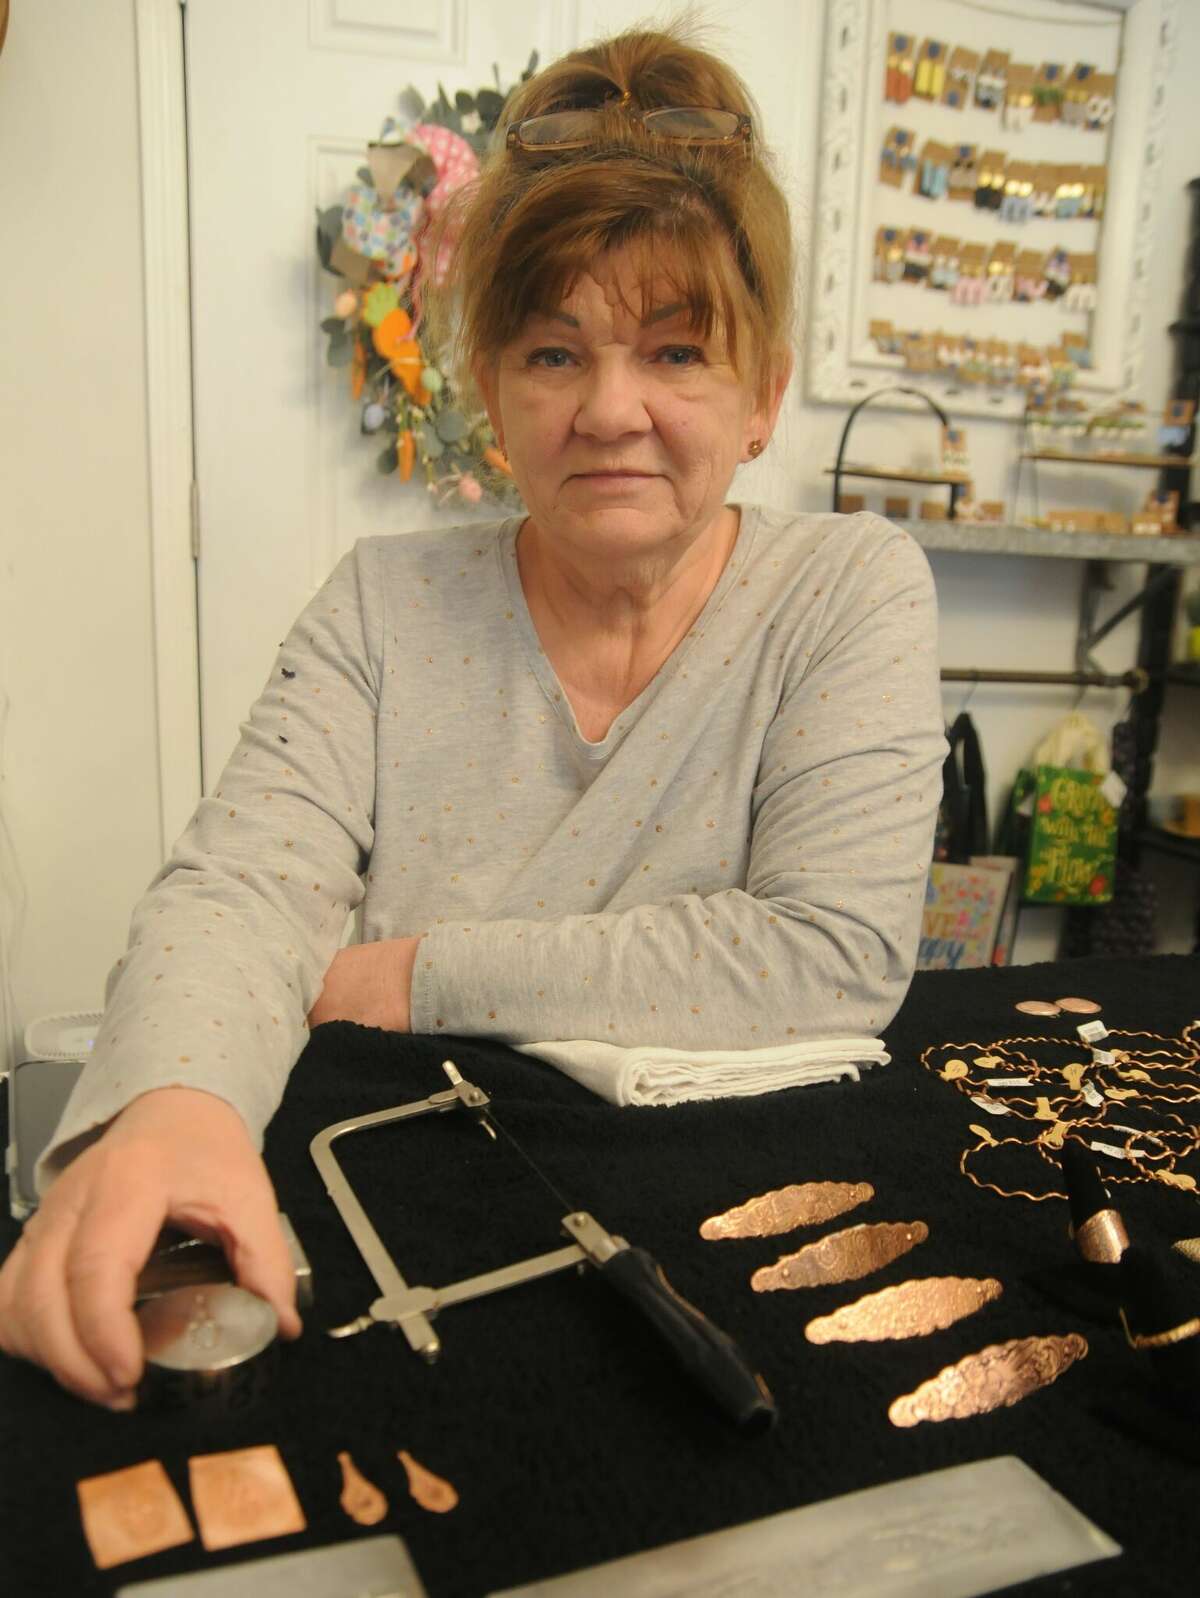 Colleen Marmino of Shipman gets ready to demonstrate a jewelry-making technique during a recent Saturday at Ruby Wren Eclectic Boutique in Alton. The business features works by about 20 artisans.